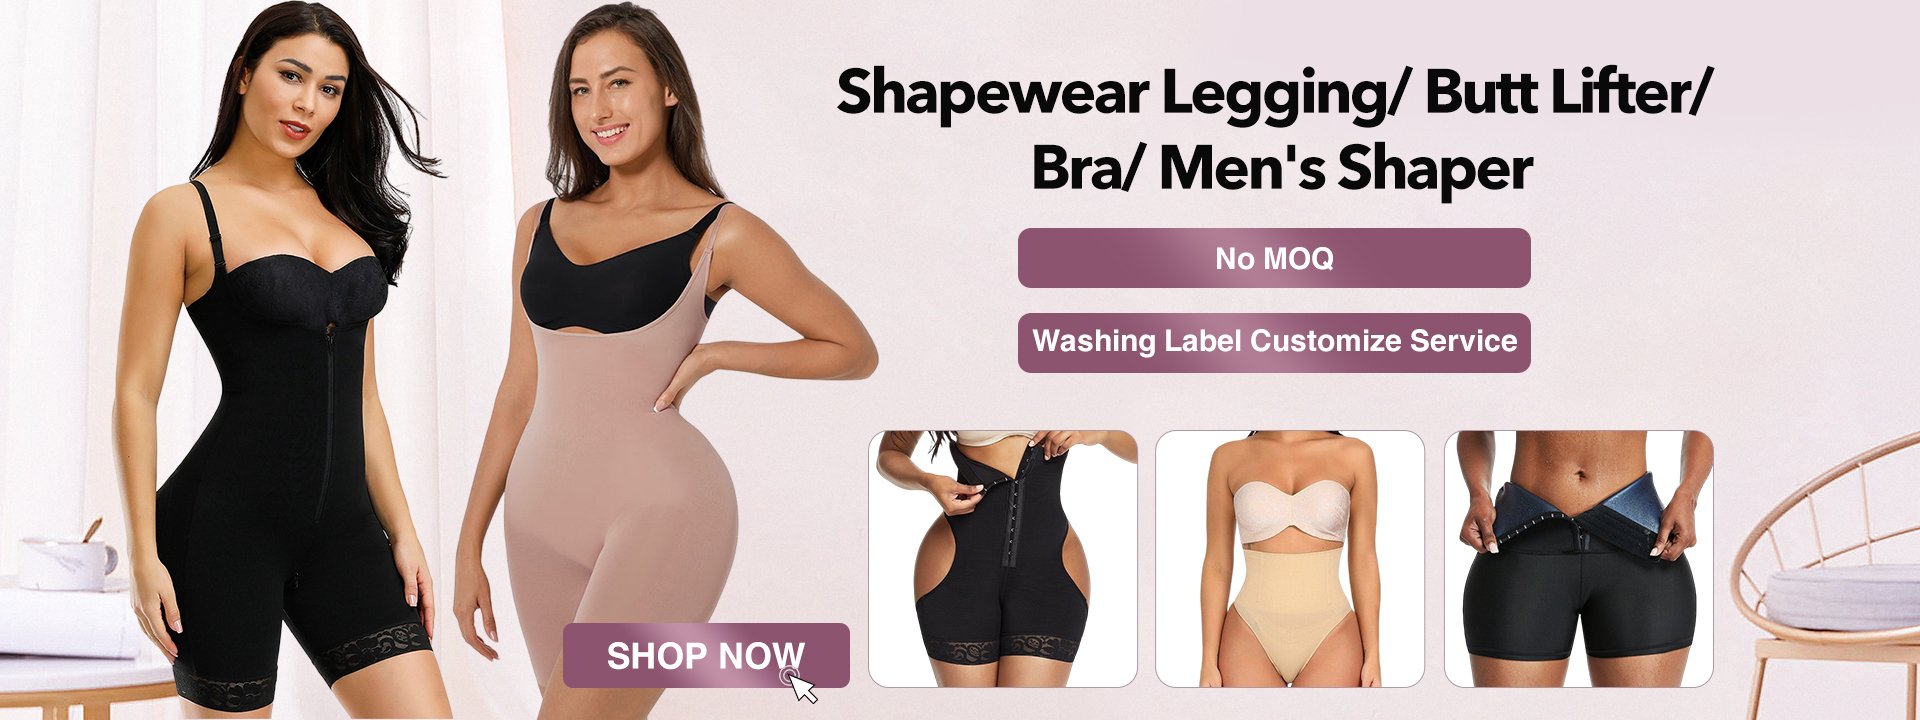 Meet The Perfect Shapers Collections for Your Store